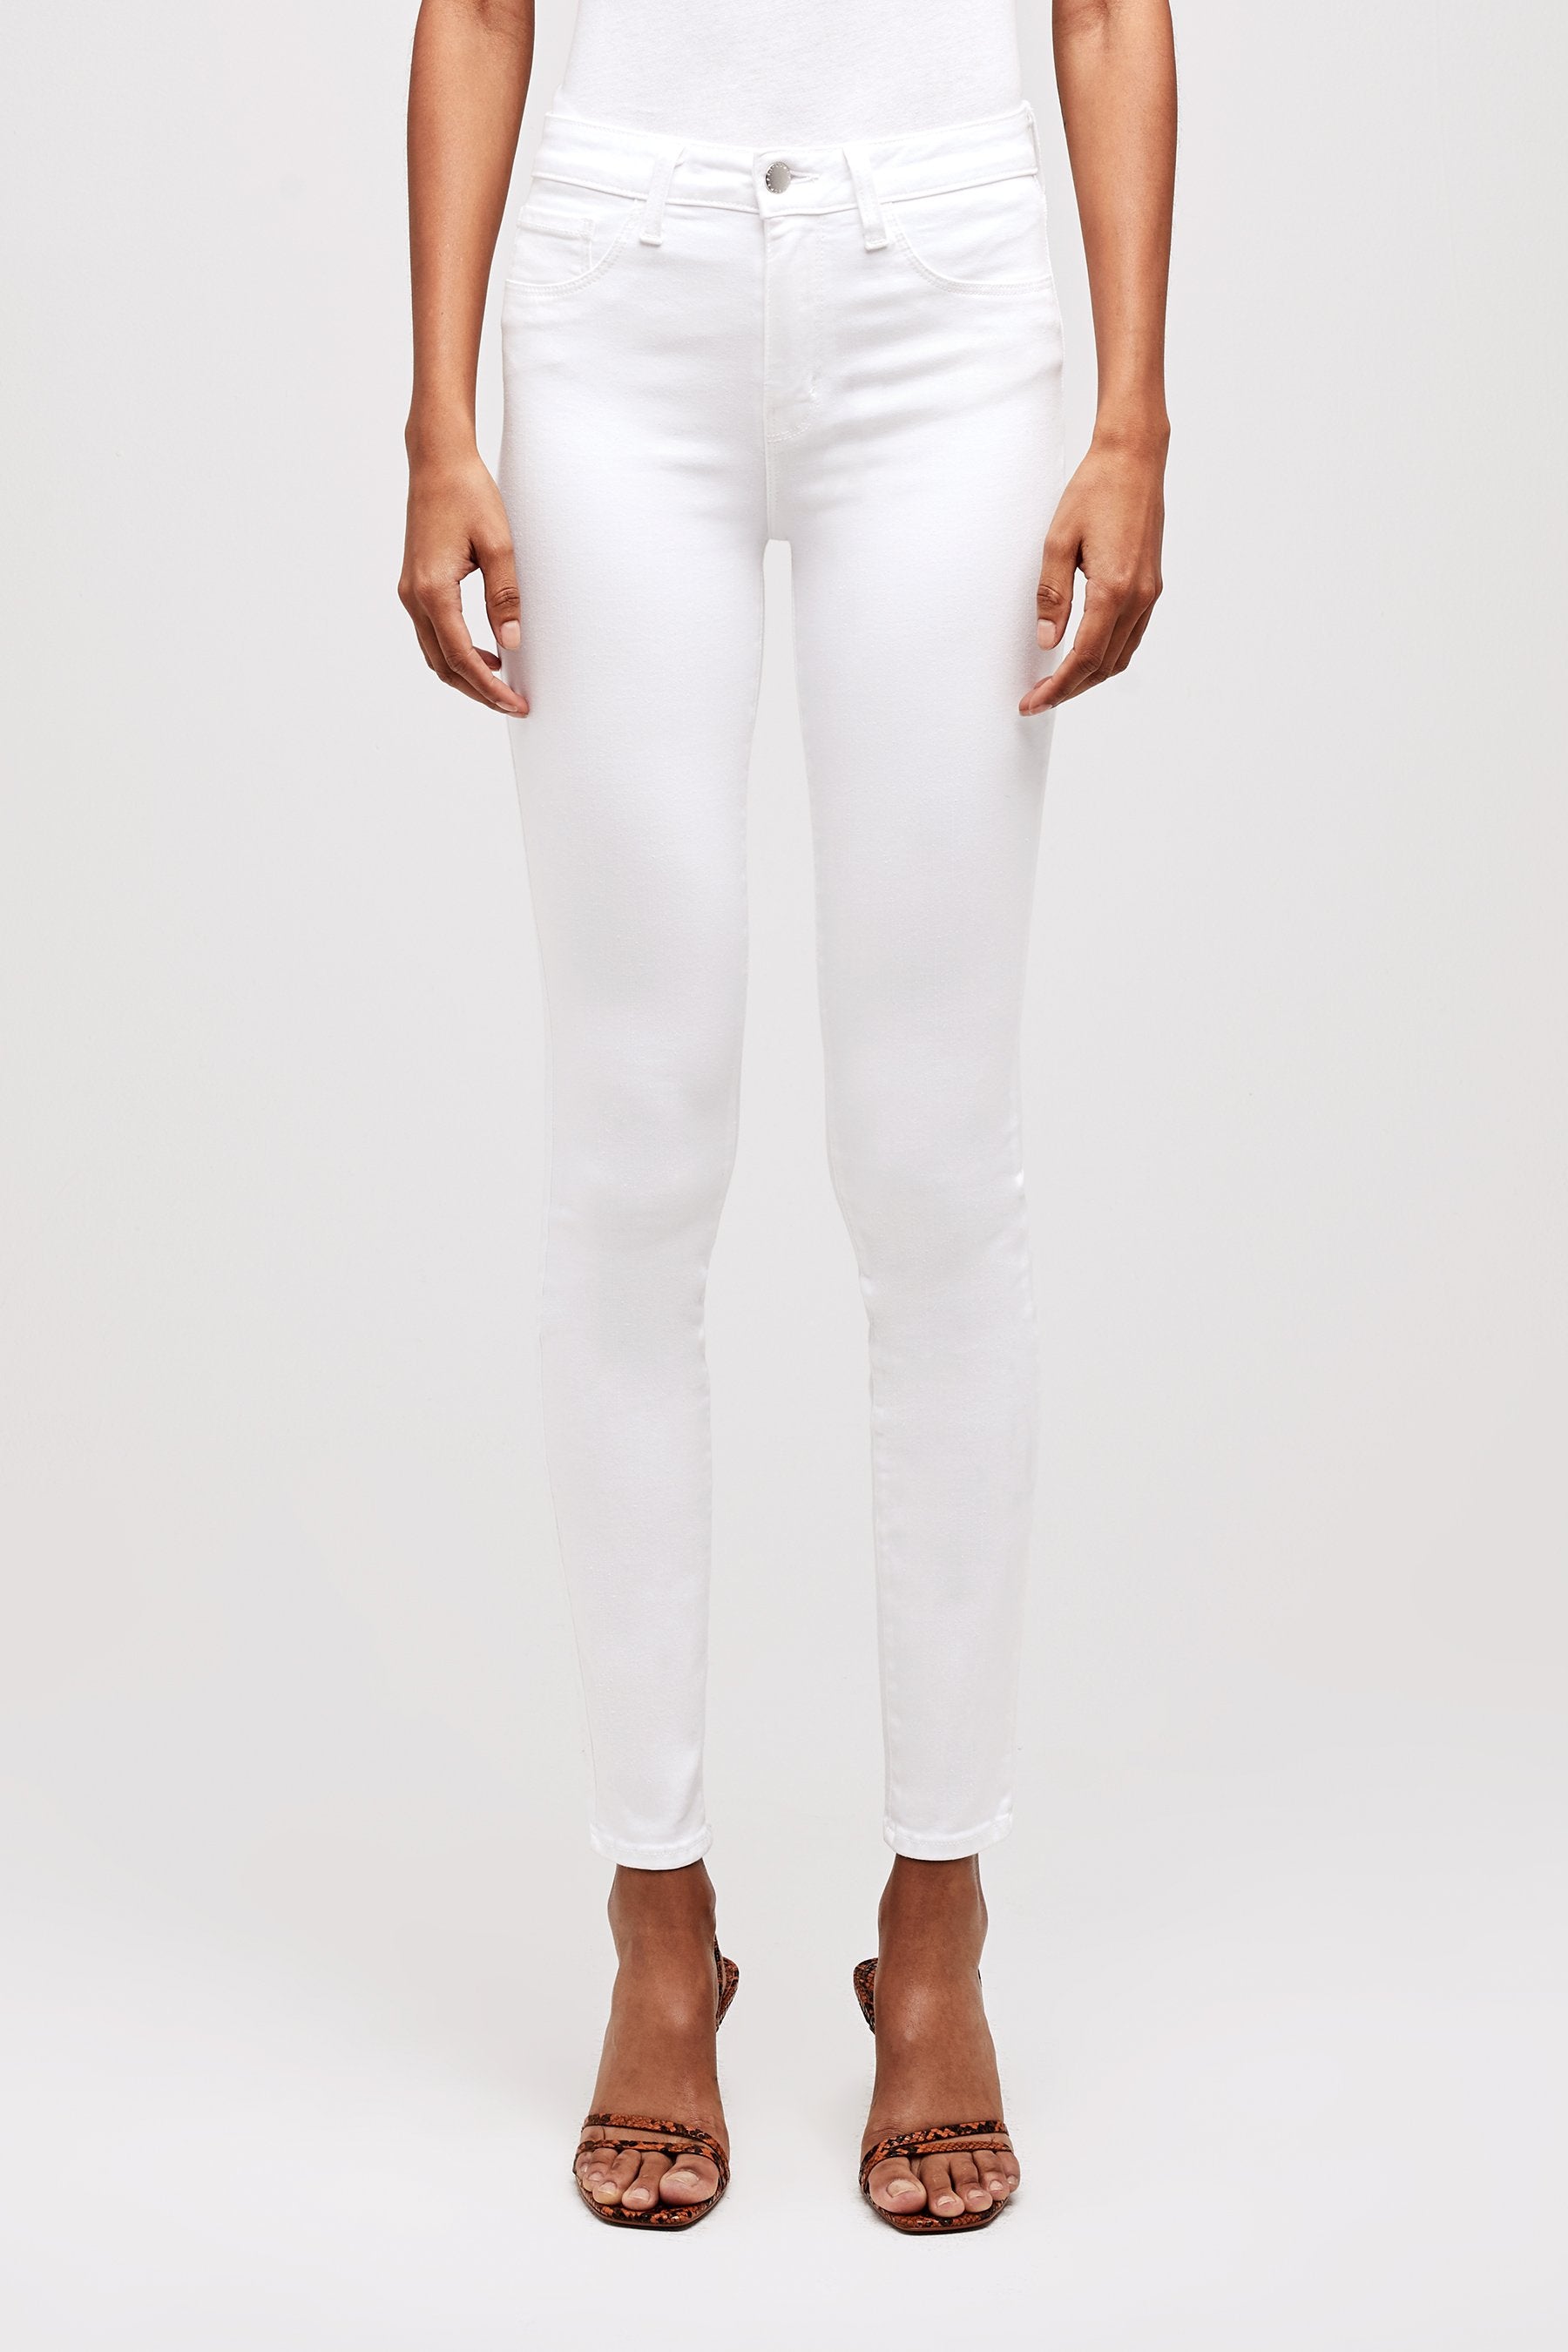 L'AGENCE MARGUERITE HIGH RISE SKINNY IN BLANC